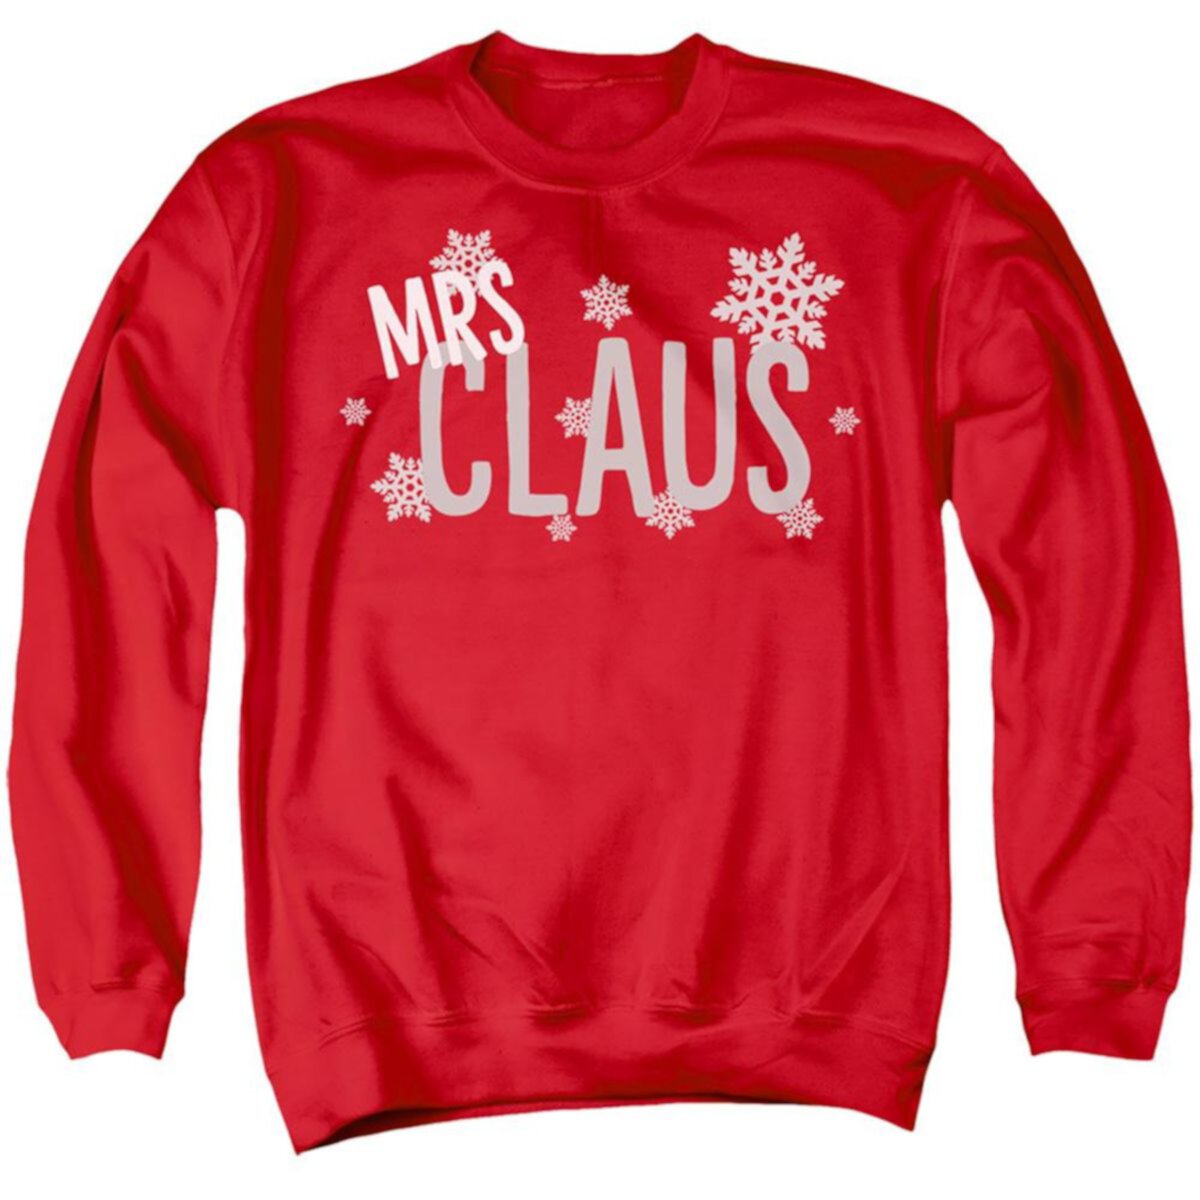 Mrs Claus This Christmas Unisex Adult Crewneck Sweatshirt Sweater Licensed Character